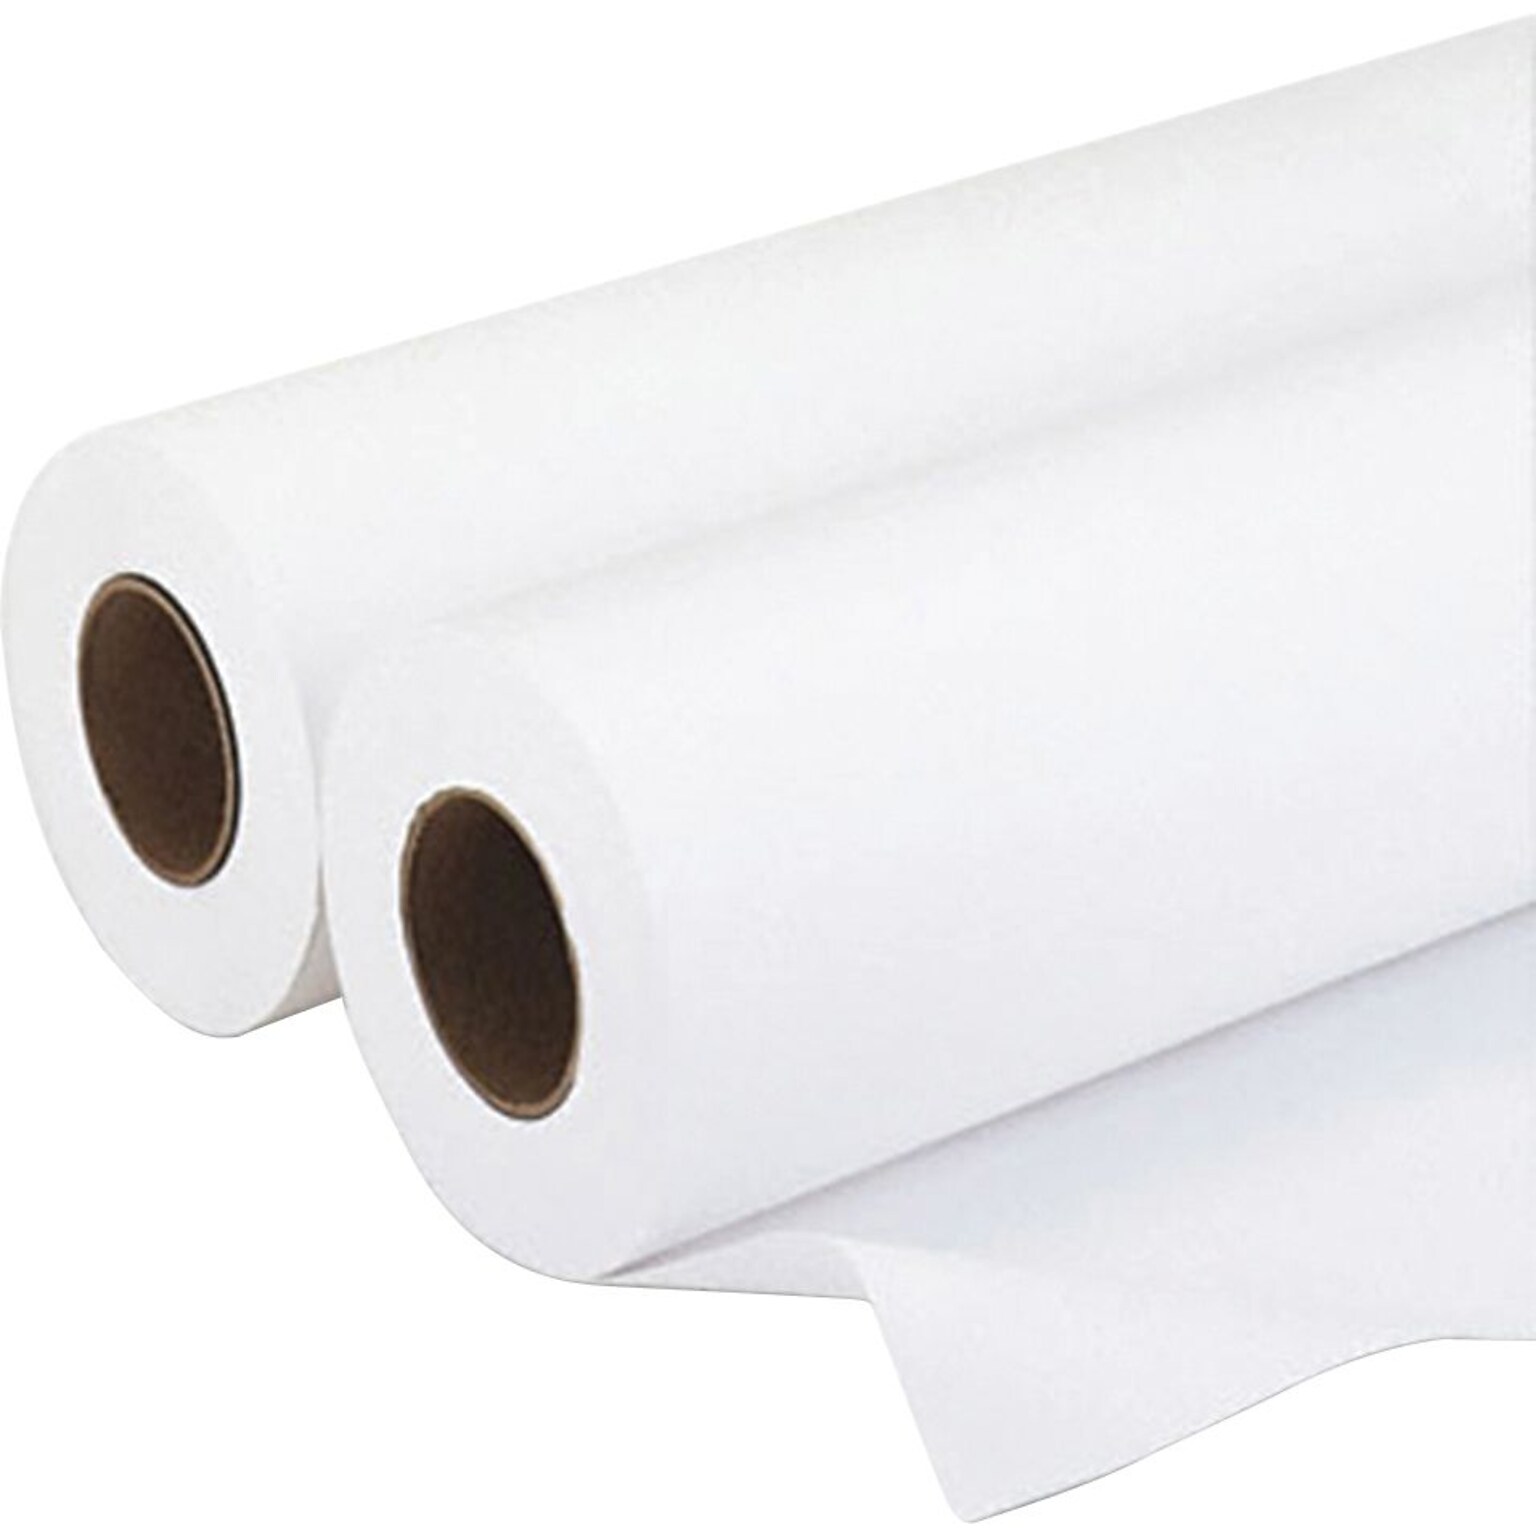 Alliance Table Paper, 40 lb. Bleached White Paper, 30 x 1000, 1 Roll